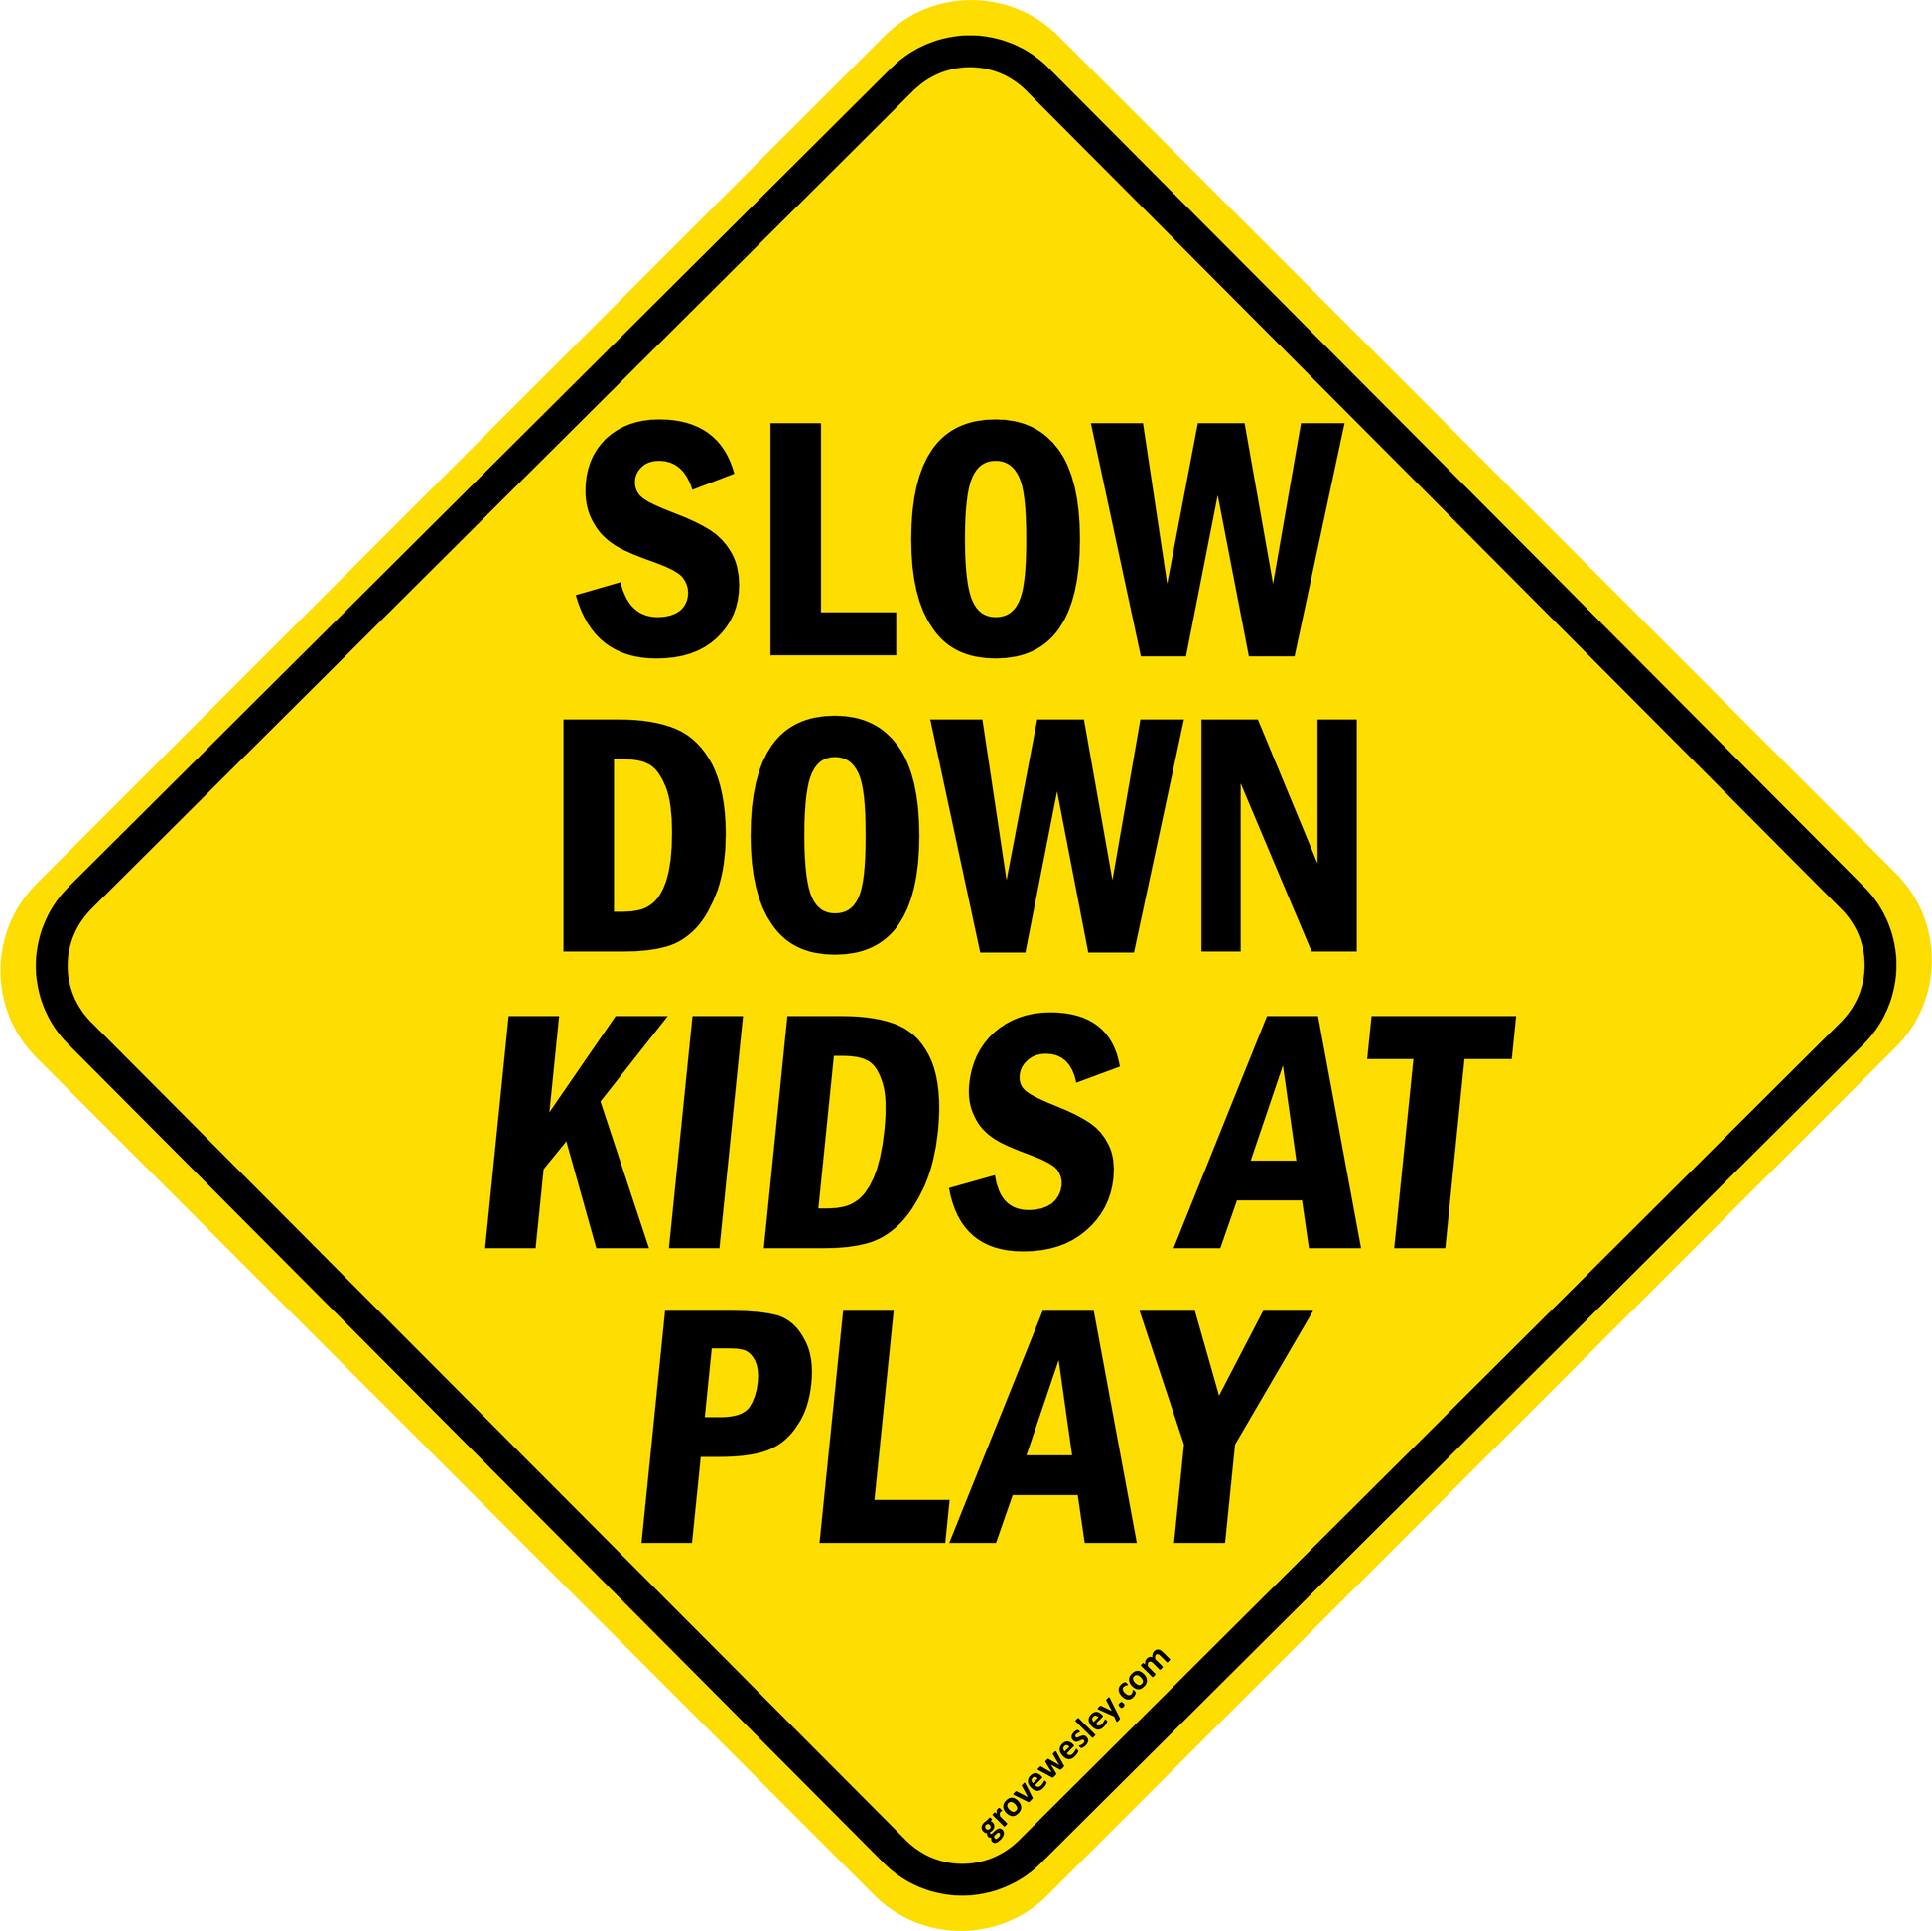 Slow down kids at play stickers